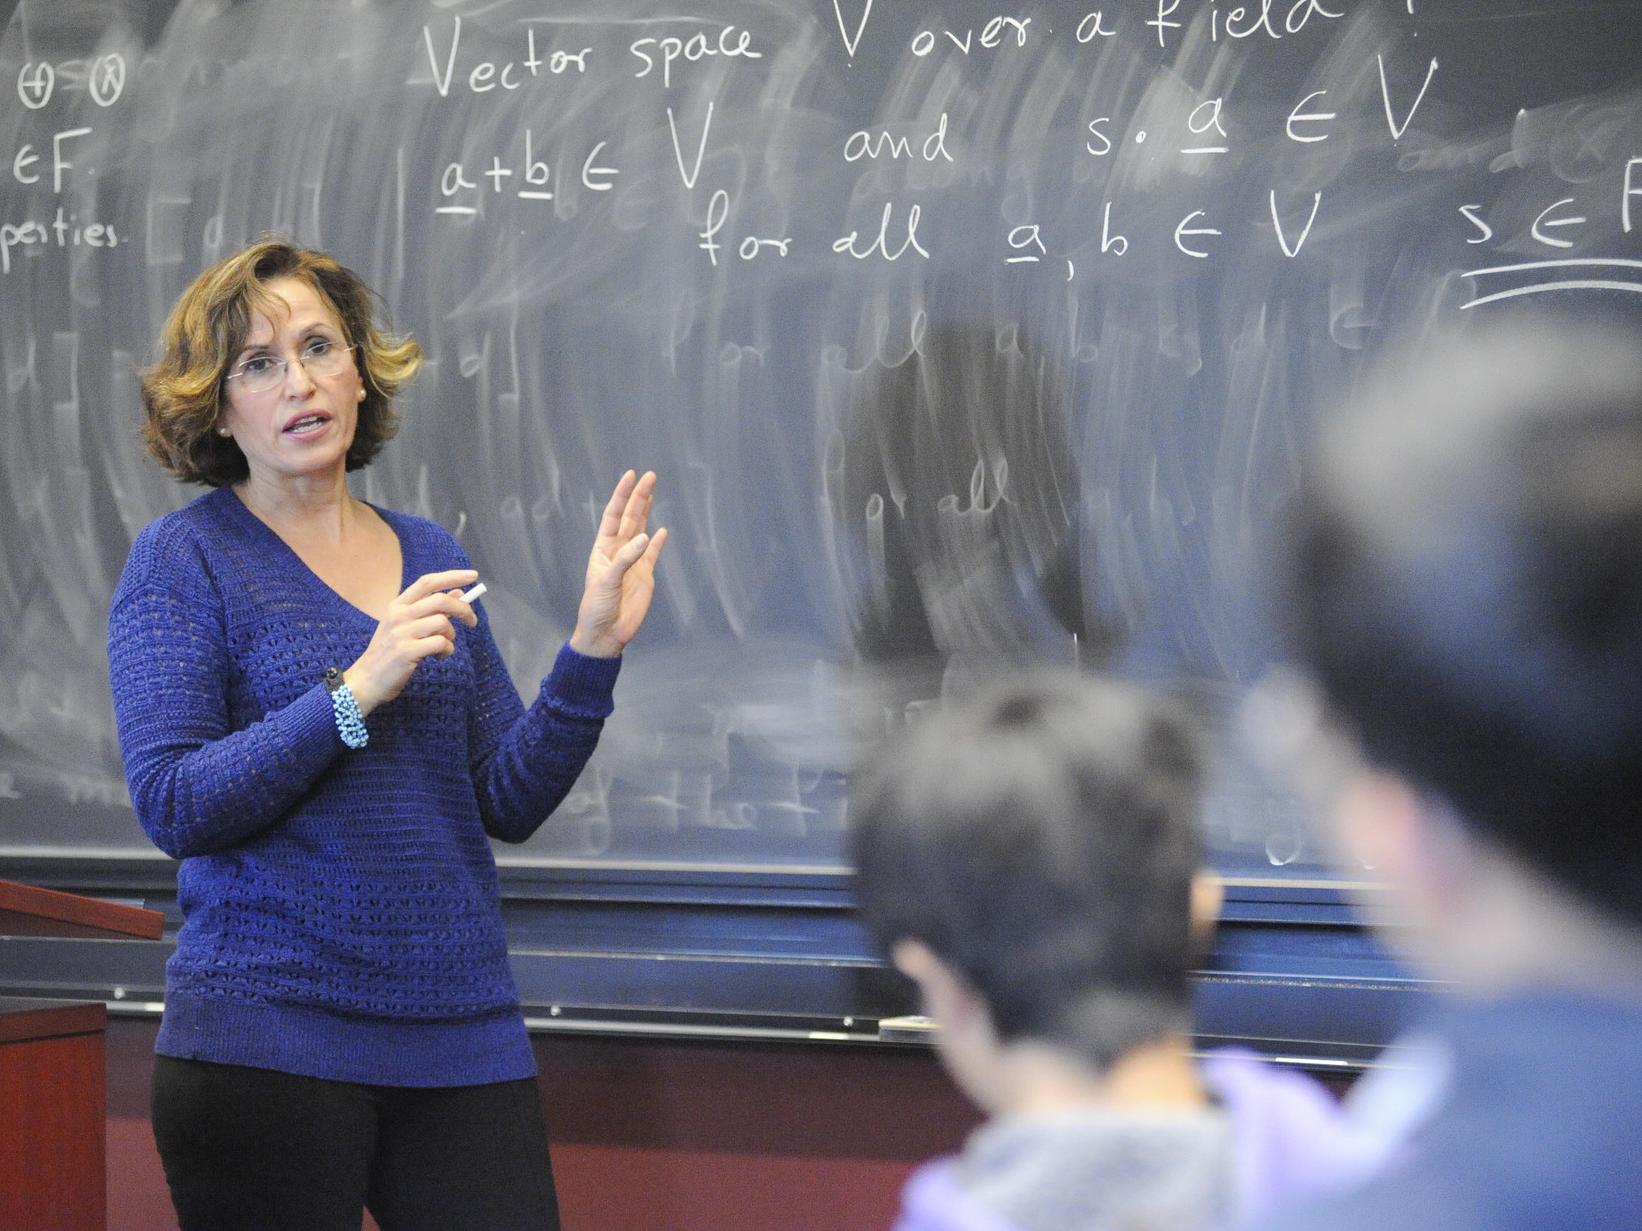 A professor in front of a blackboard with mathematical expressions behind, and students in the foreground